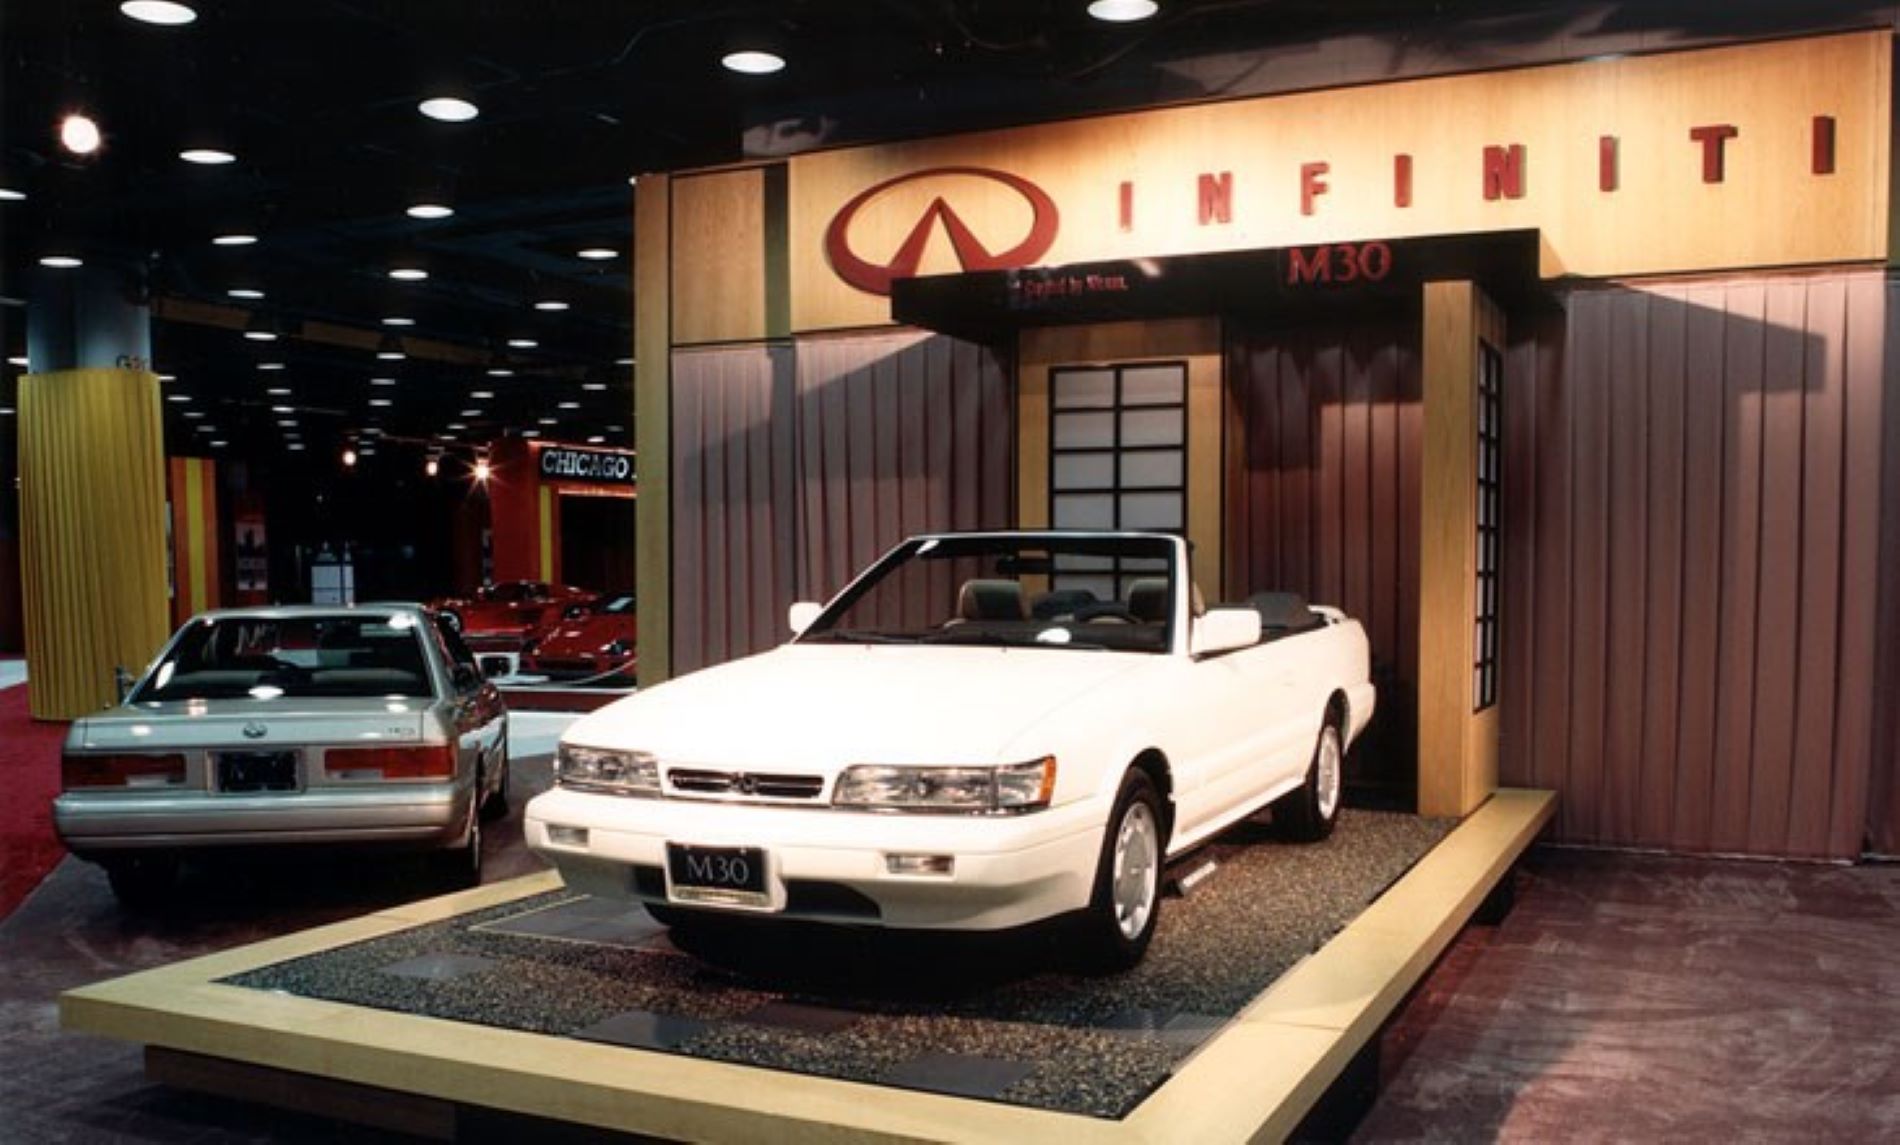 When Nissan Motors president first introduced the INFINITI Lineup, it held true to its Nissan roots, but INFINITI found its own roots in innovations.